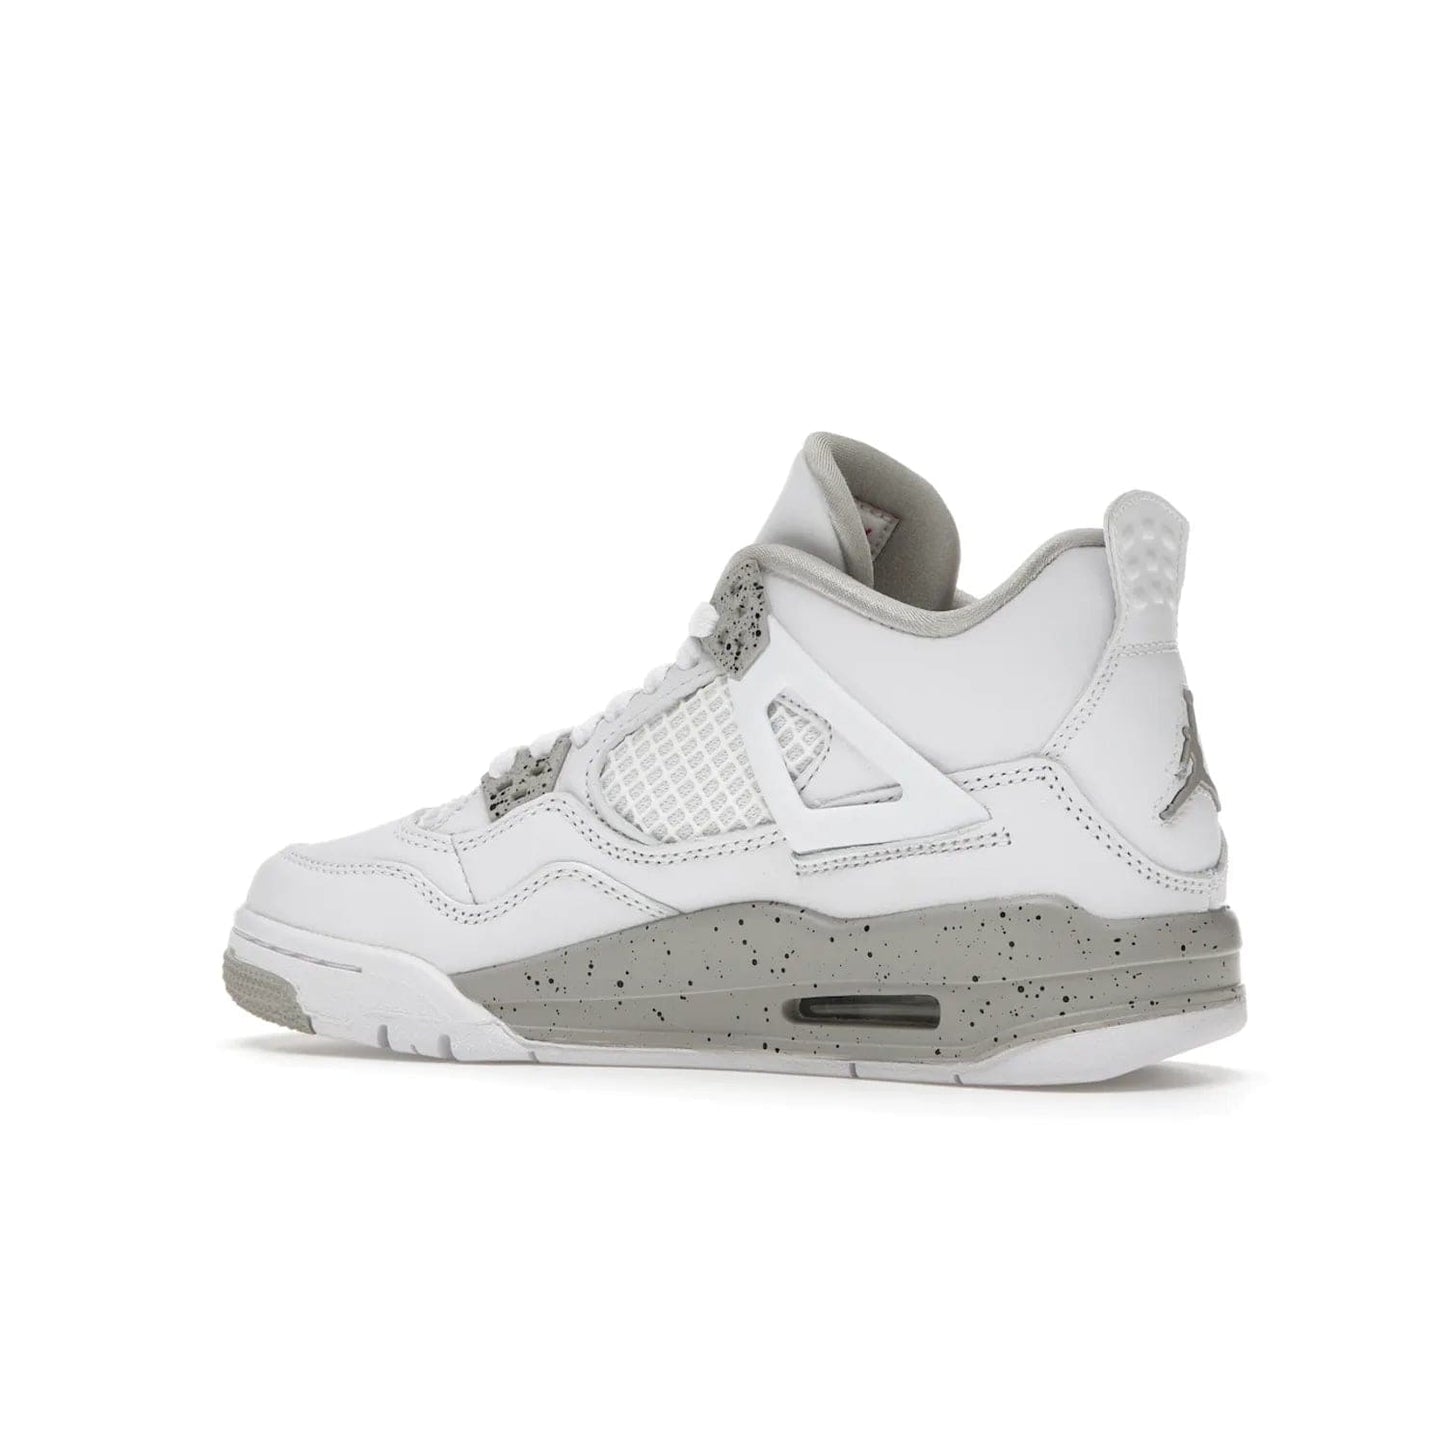 Jordan 4 Retro White Oreo (2021) (GS) - Image 22 - Only at www.BallersClubKickz.com - White Oreo Air Jordan 4 Retro 2021 GS - Iconic sneaker silhouette with white canvas upper, Tech Grey detailing, and Fire Red accents. Available July 2021.